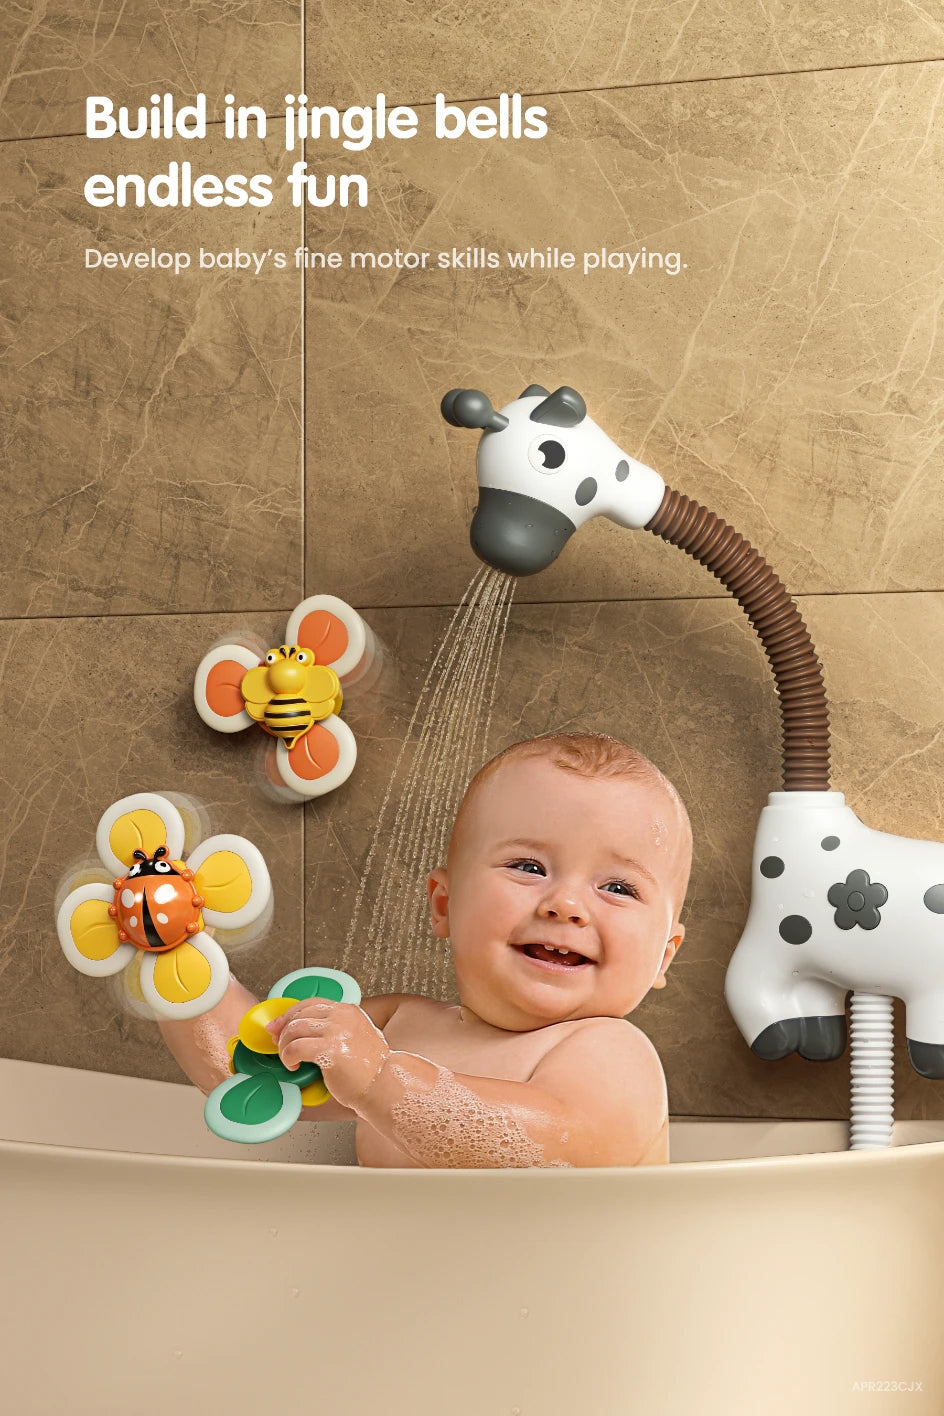 Baby bath toys with spinning toys wind up baby bath toys build in lingle bells endless fun